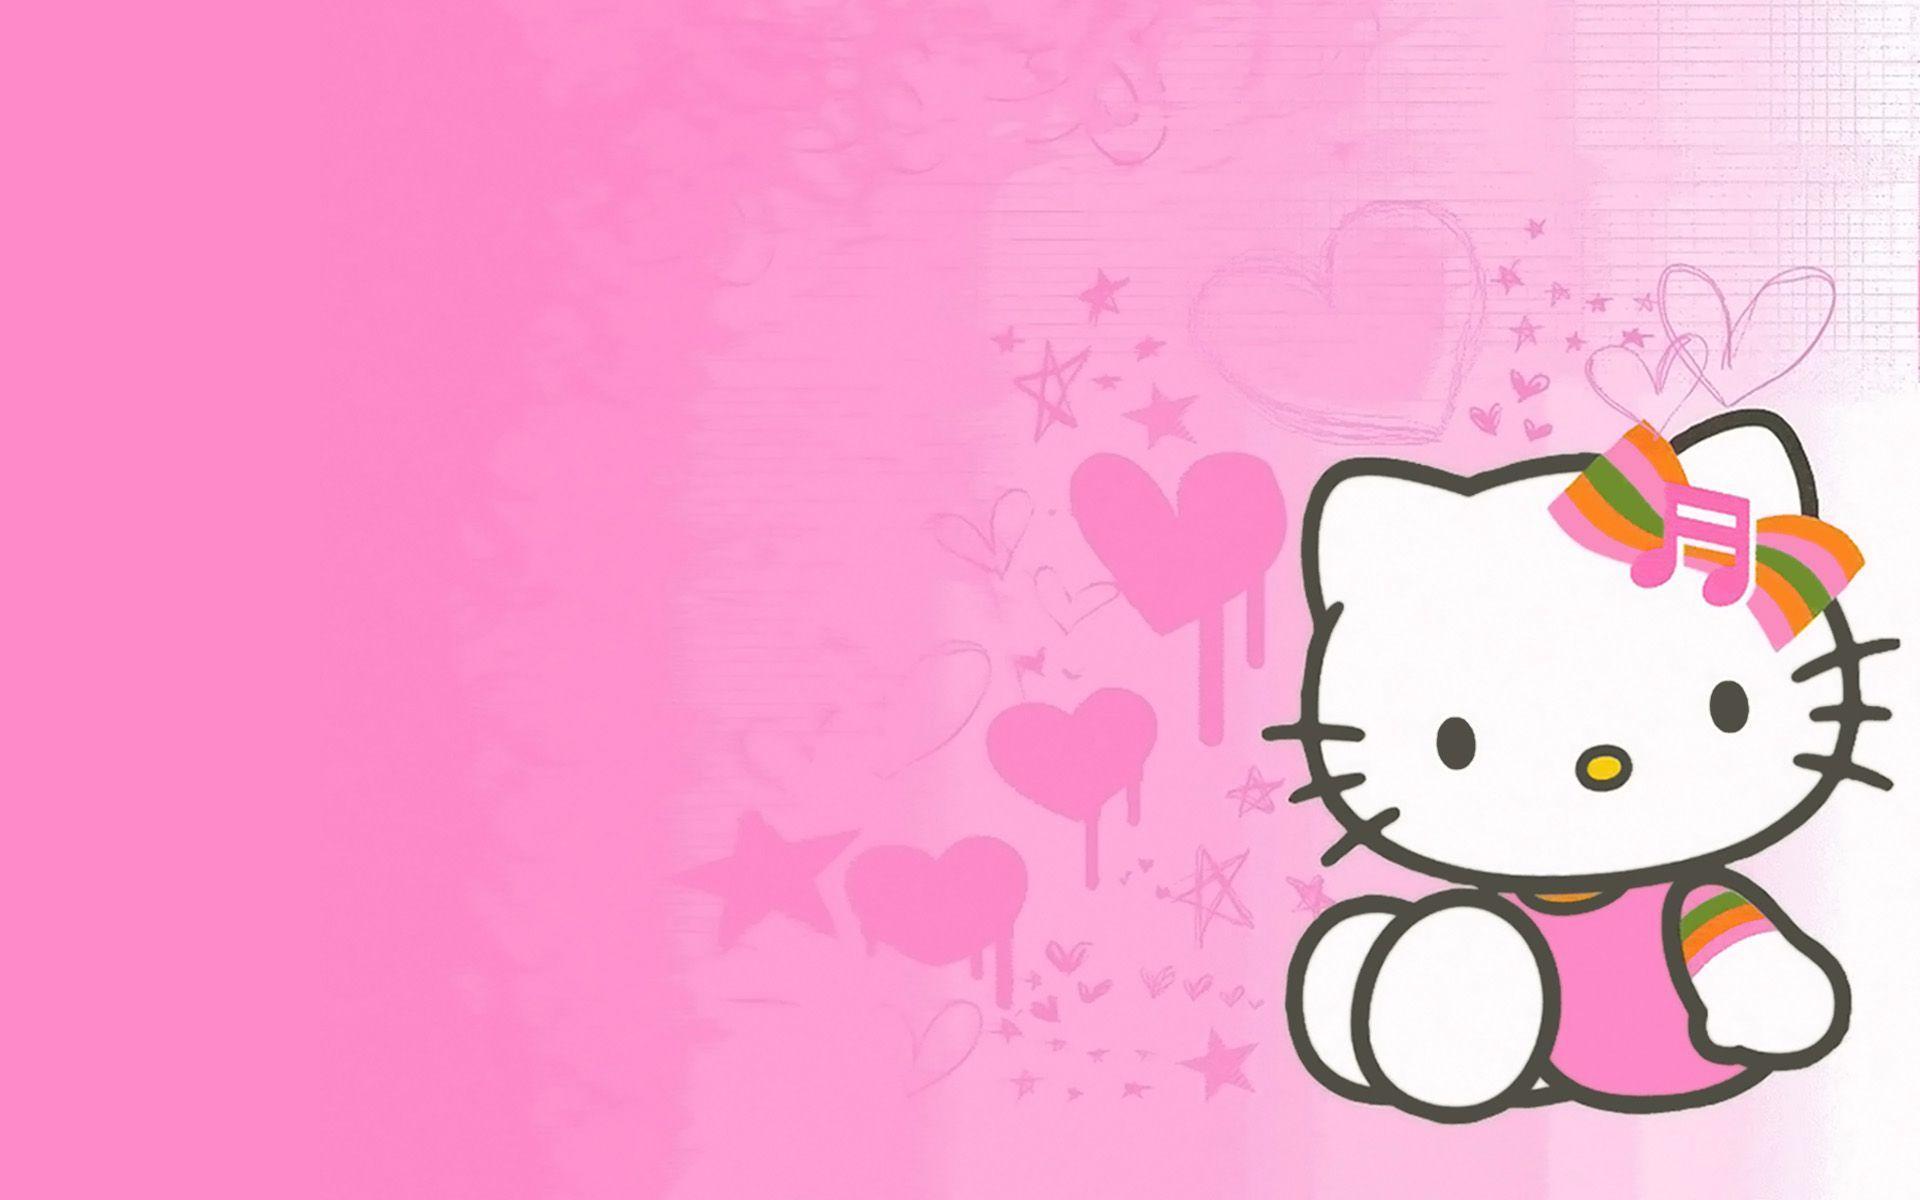 Wallpaper For > Wallpaper Hello Kitty Pink Cute